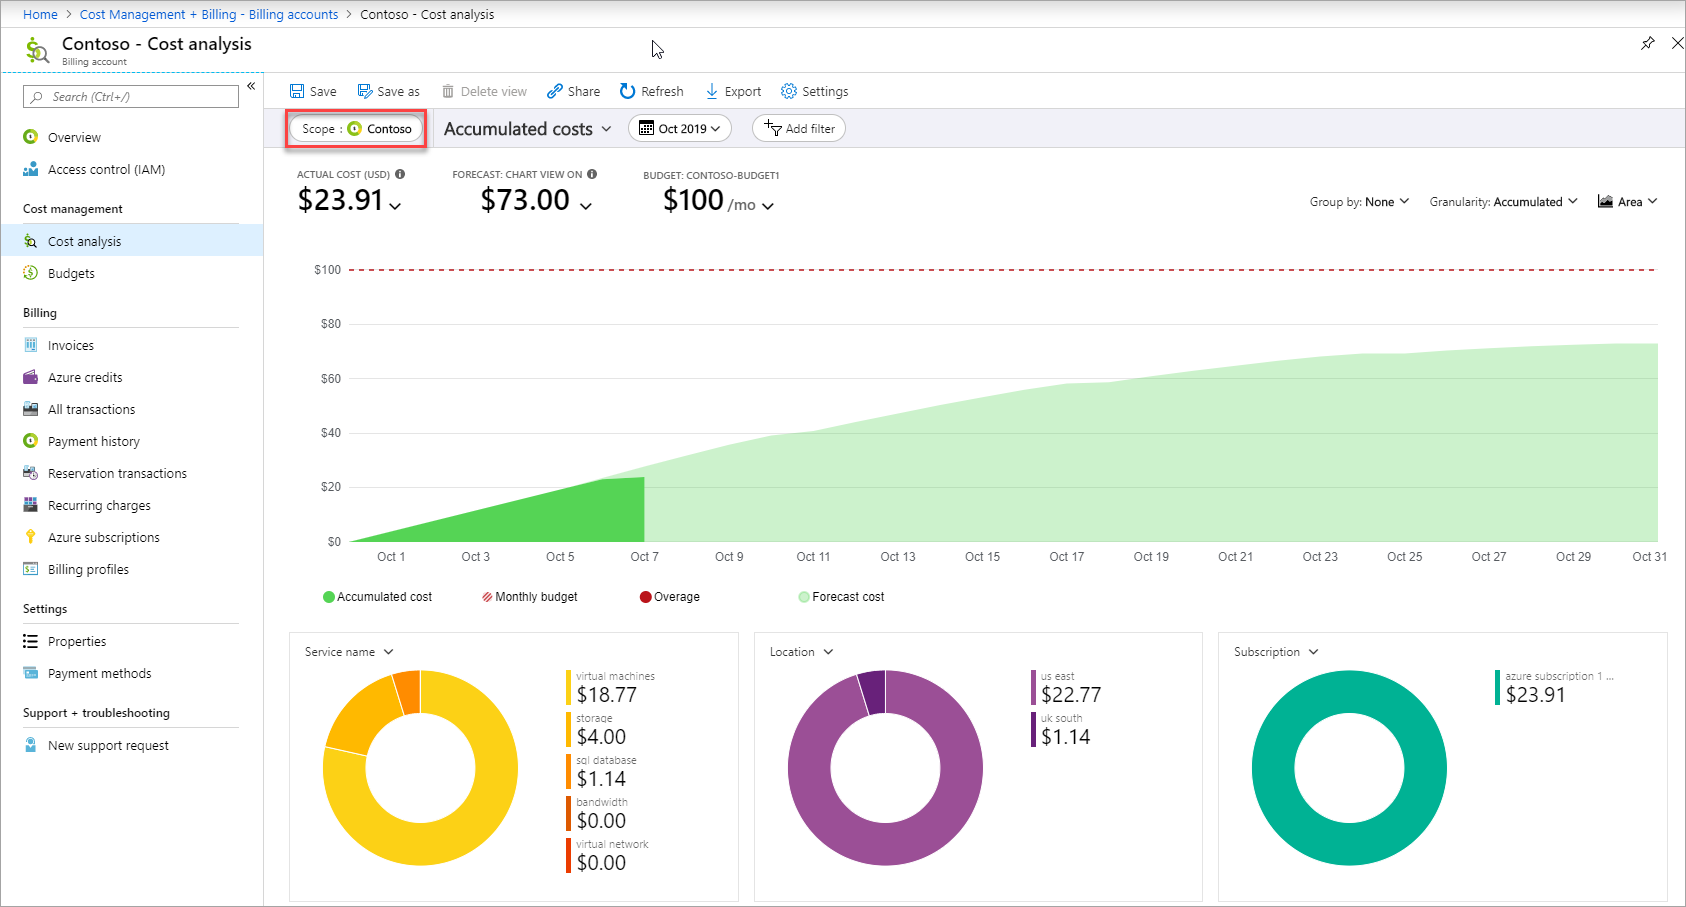 Screenshot of the cost analysis view in Azure portal.